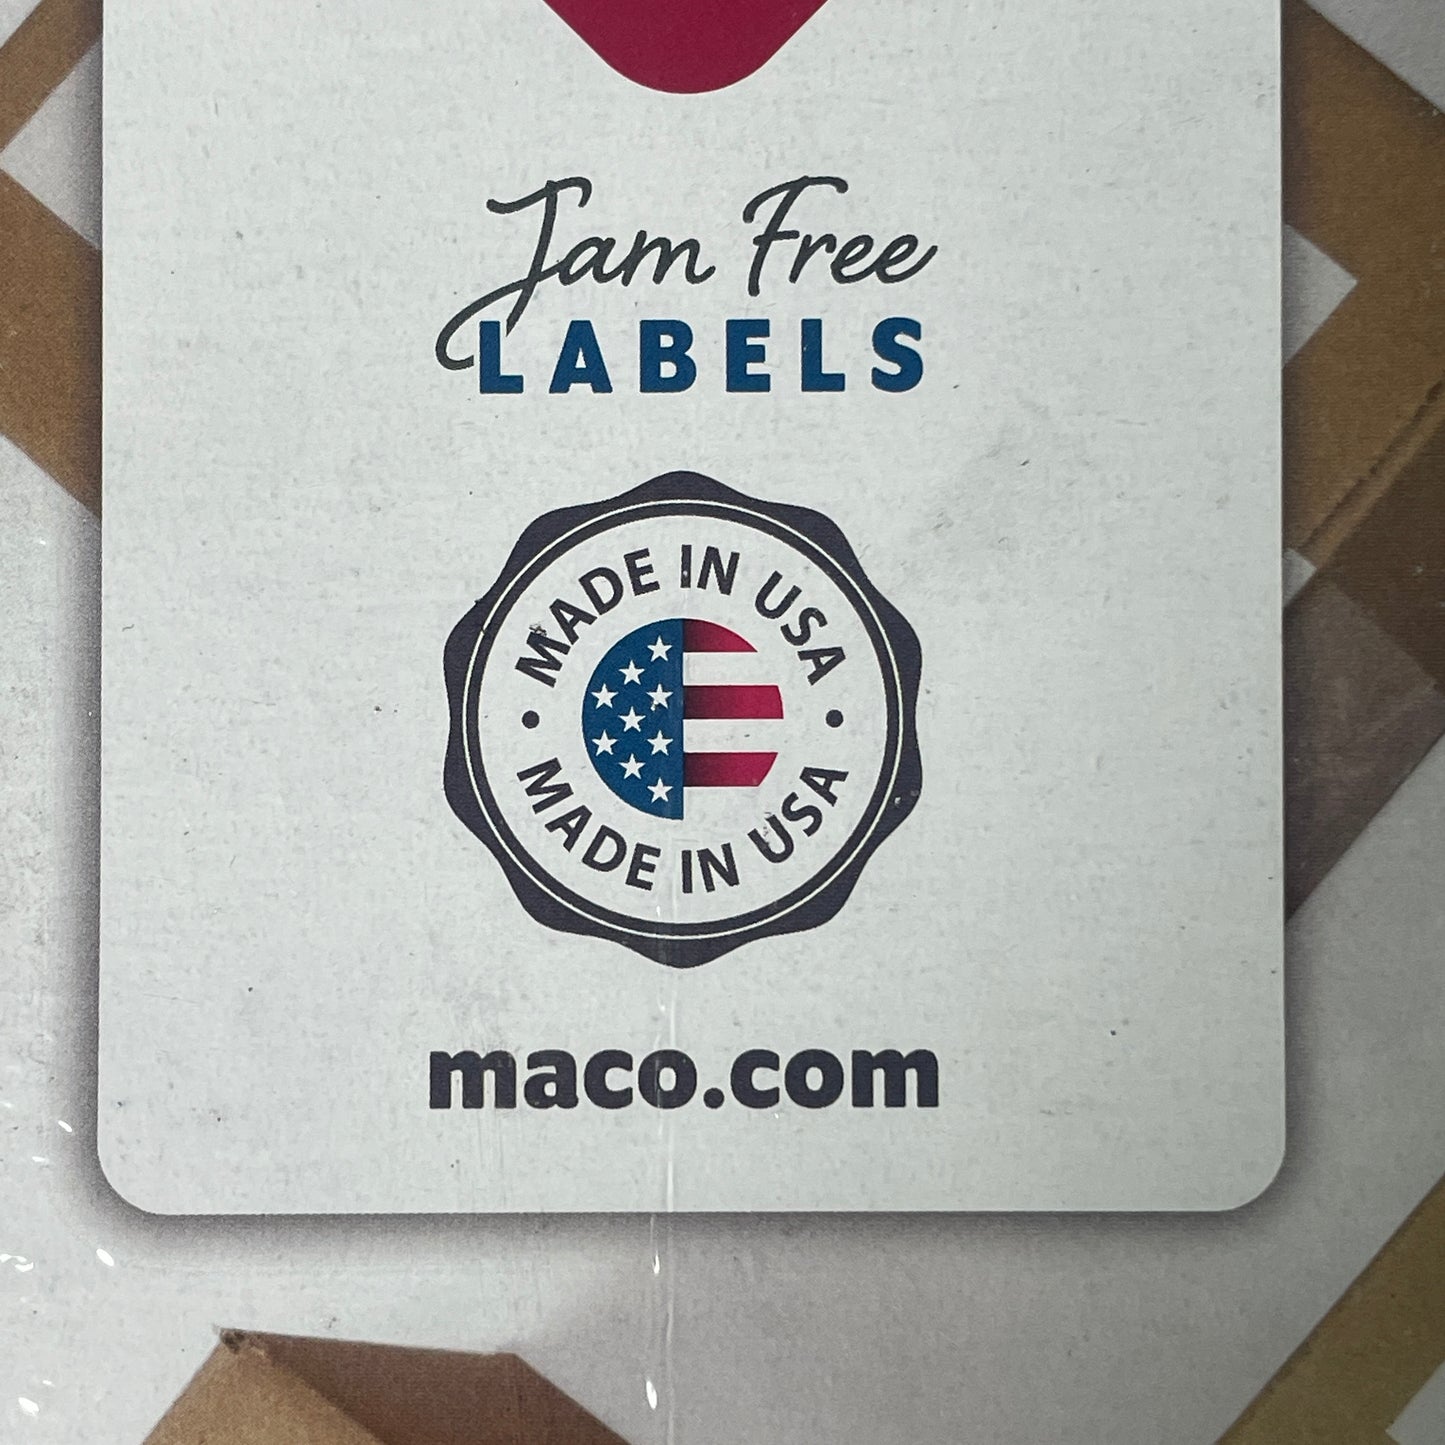 MACO Laser / Ink Jet White Shipping Labels 5.5" x 8.5” 200 Labels (100 sheets) ML-0200